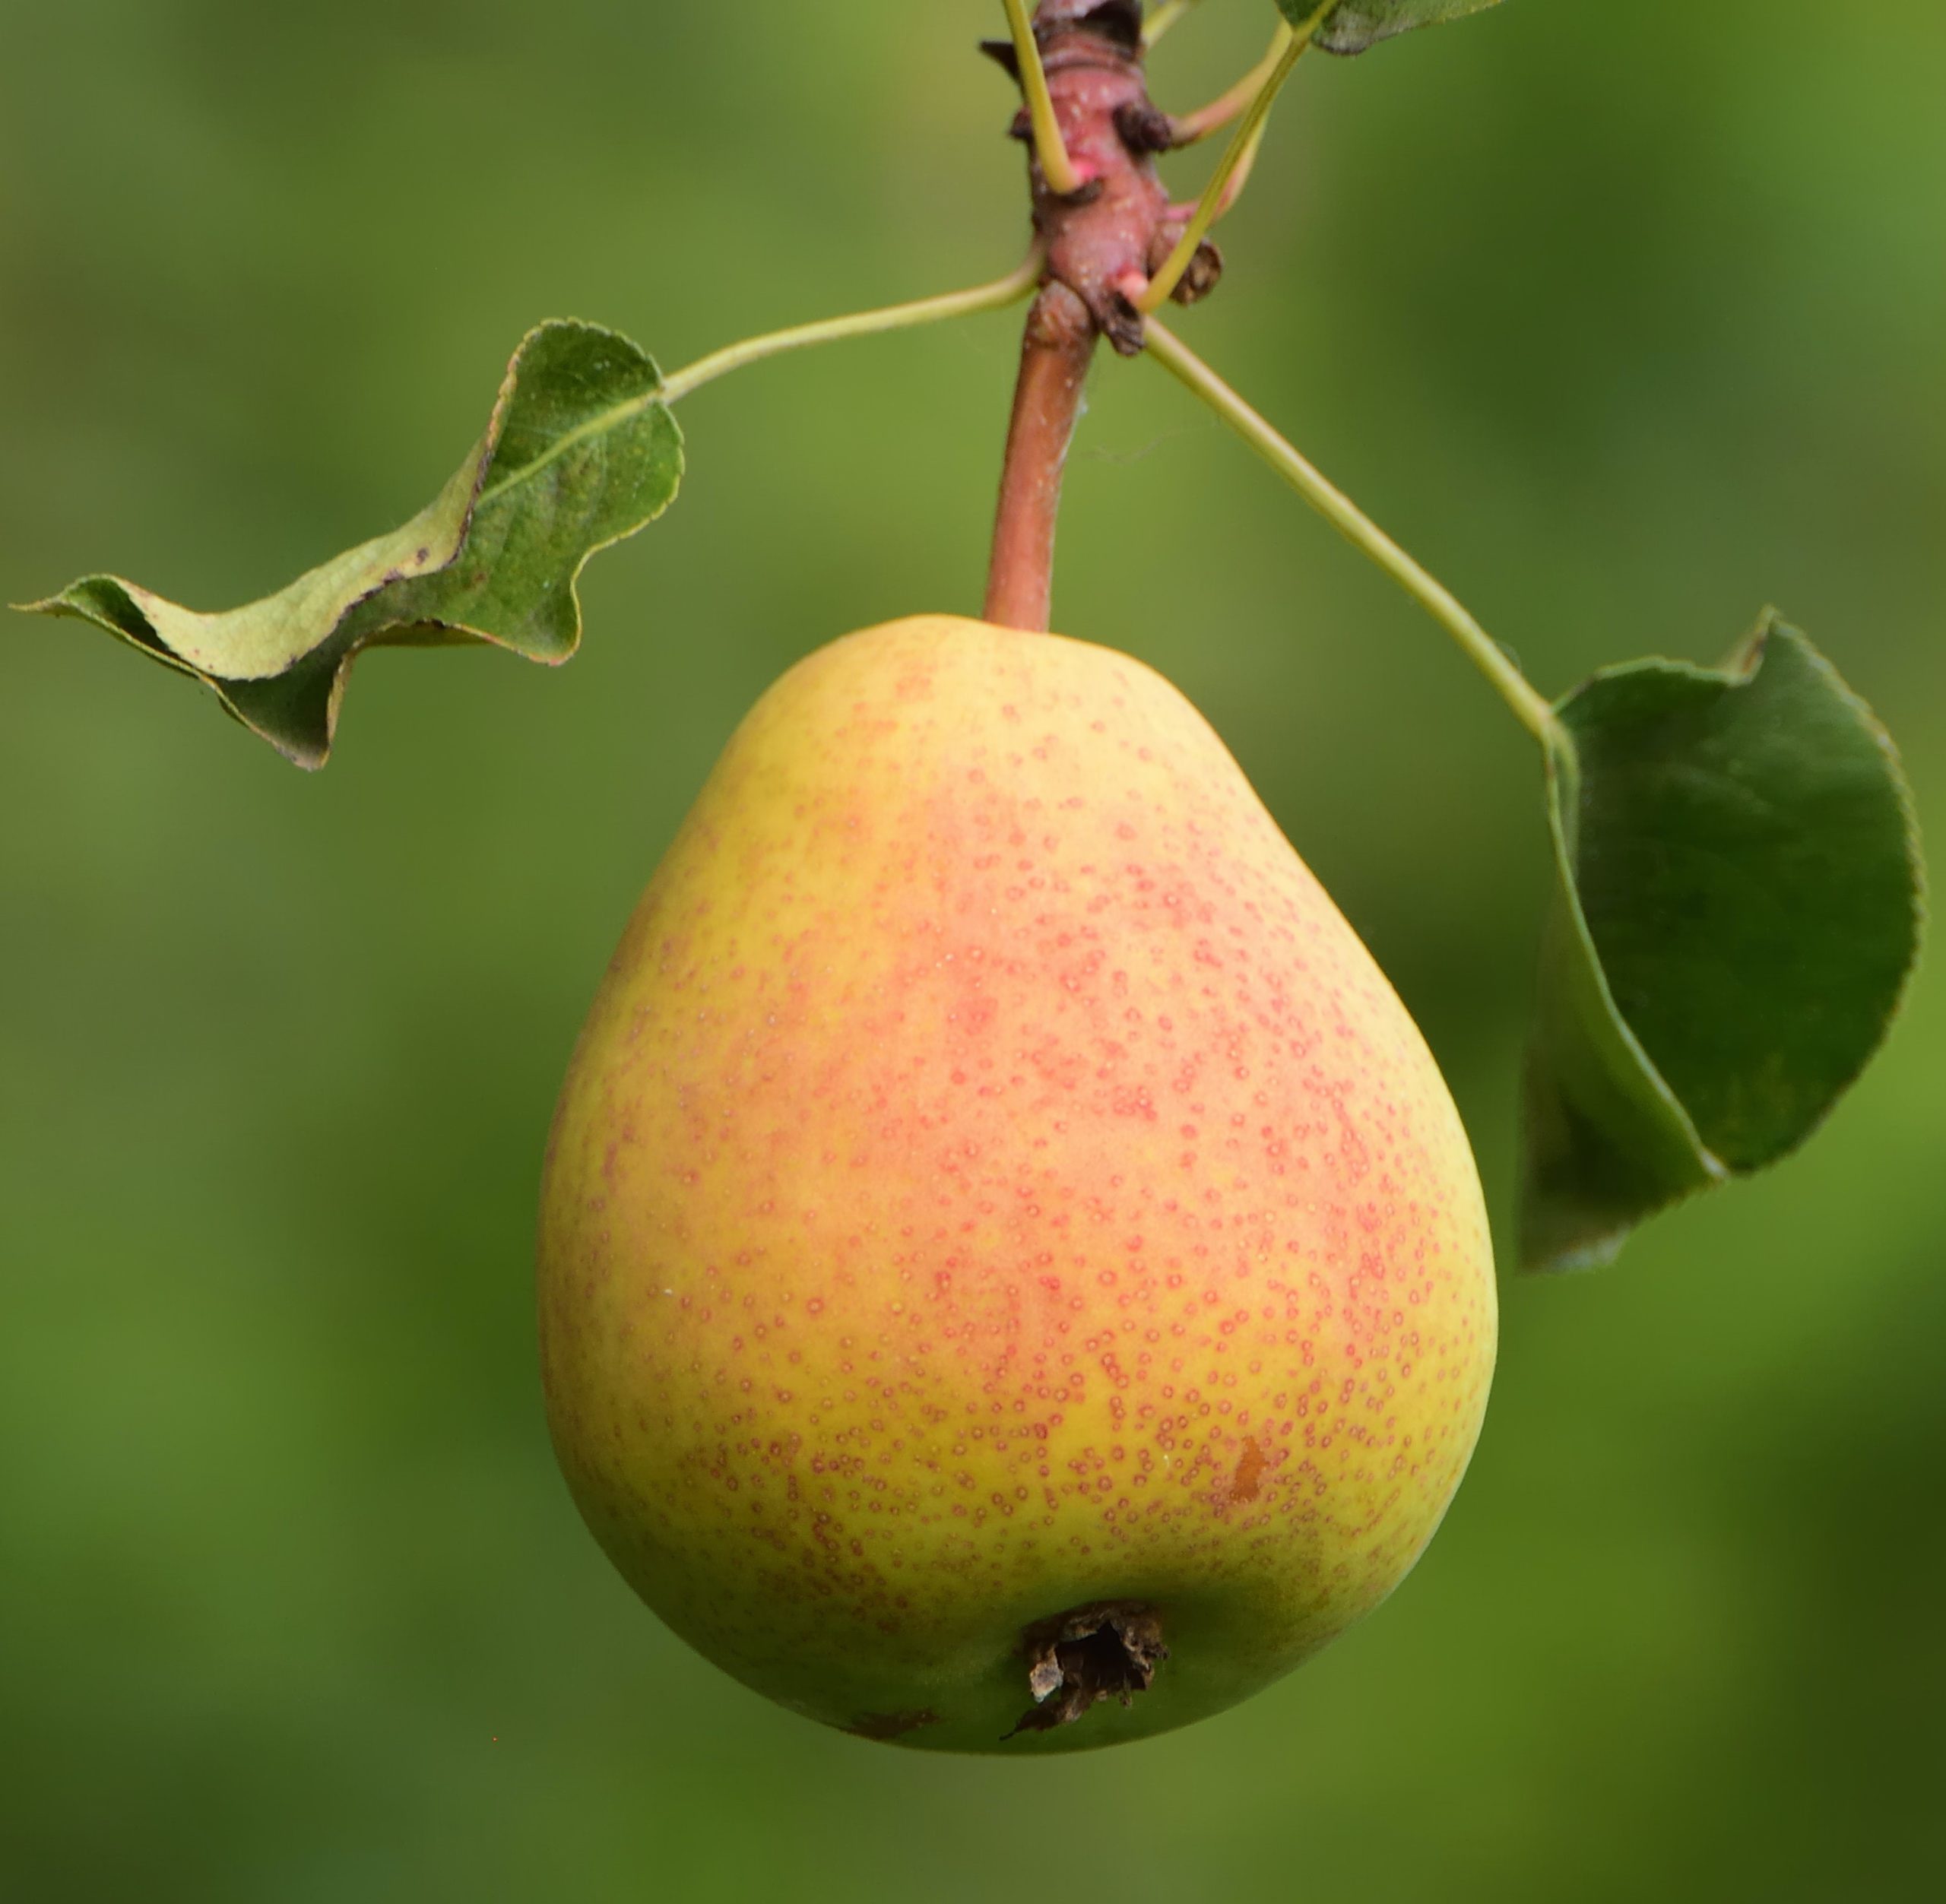 https://www.trees.com/wp-content/uploads/2022/12/Comice-Pear-Tree-3-scaled.jpg